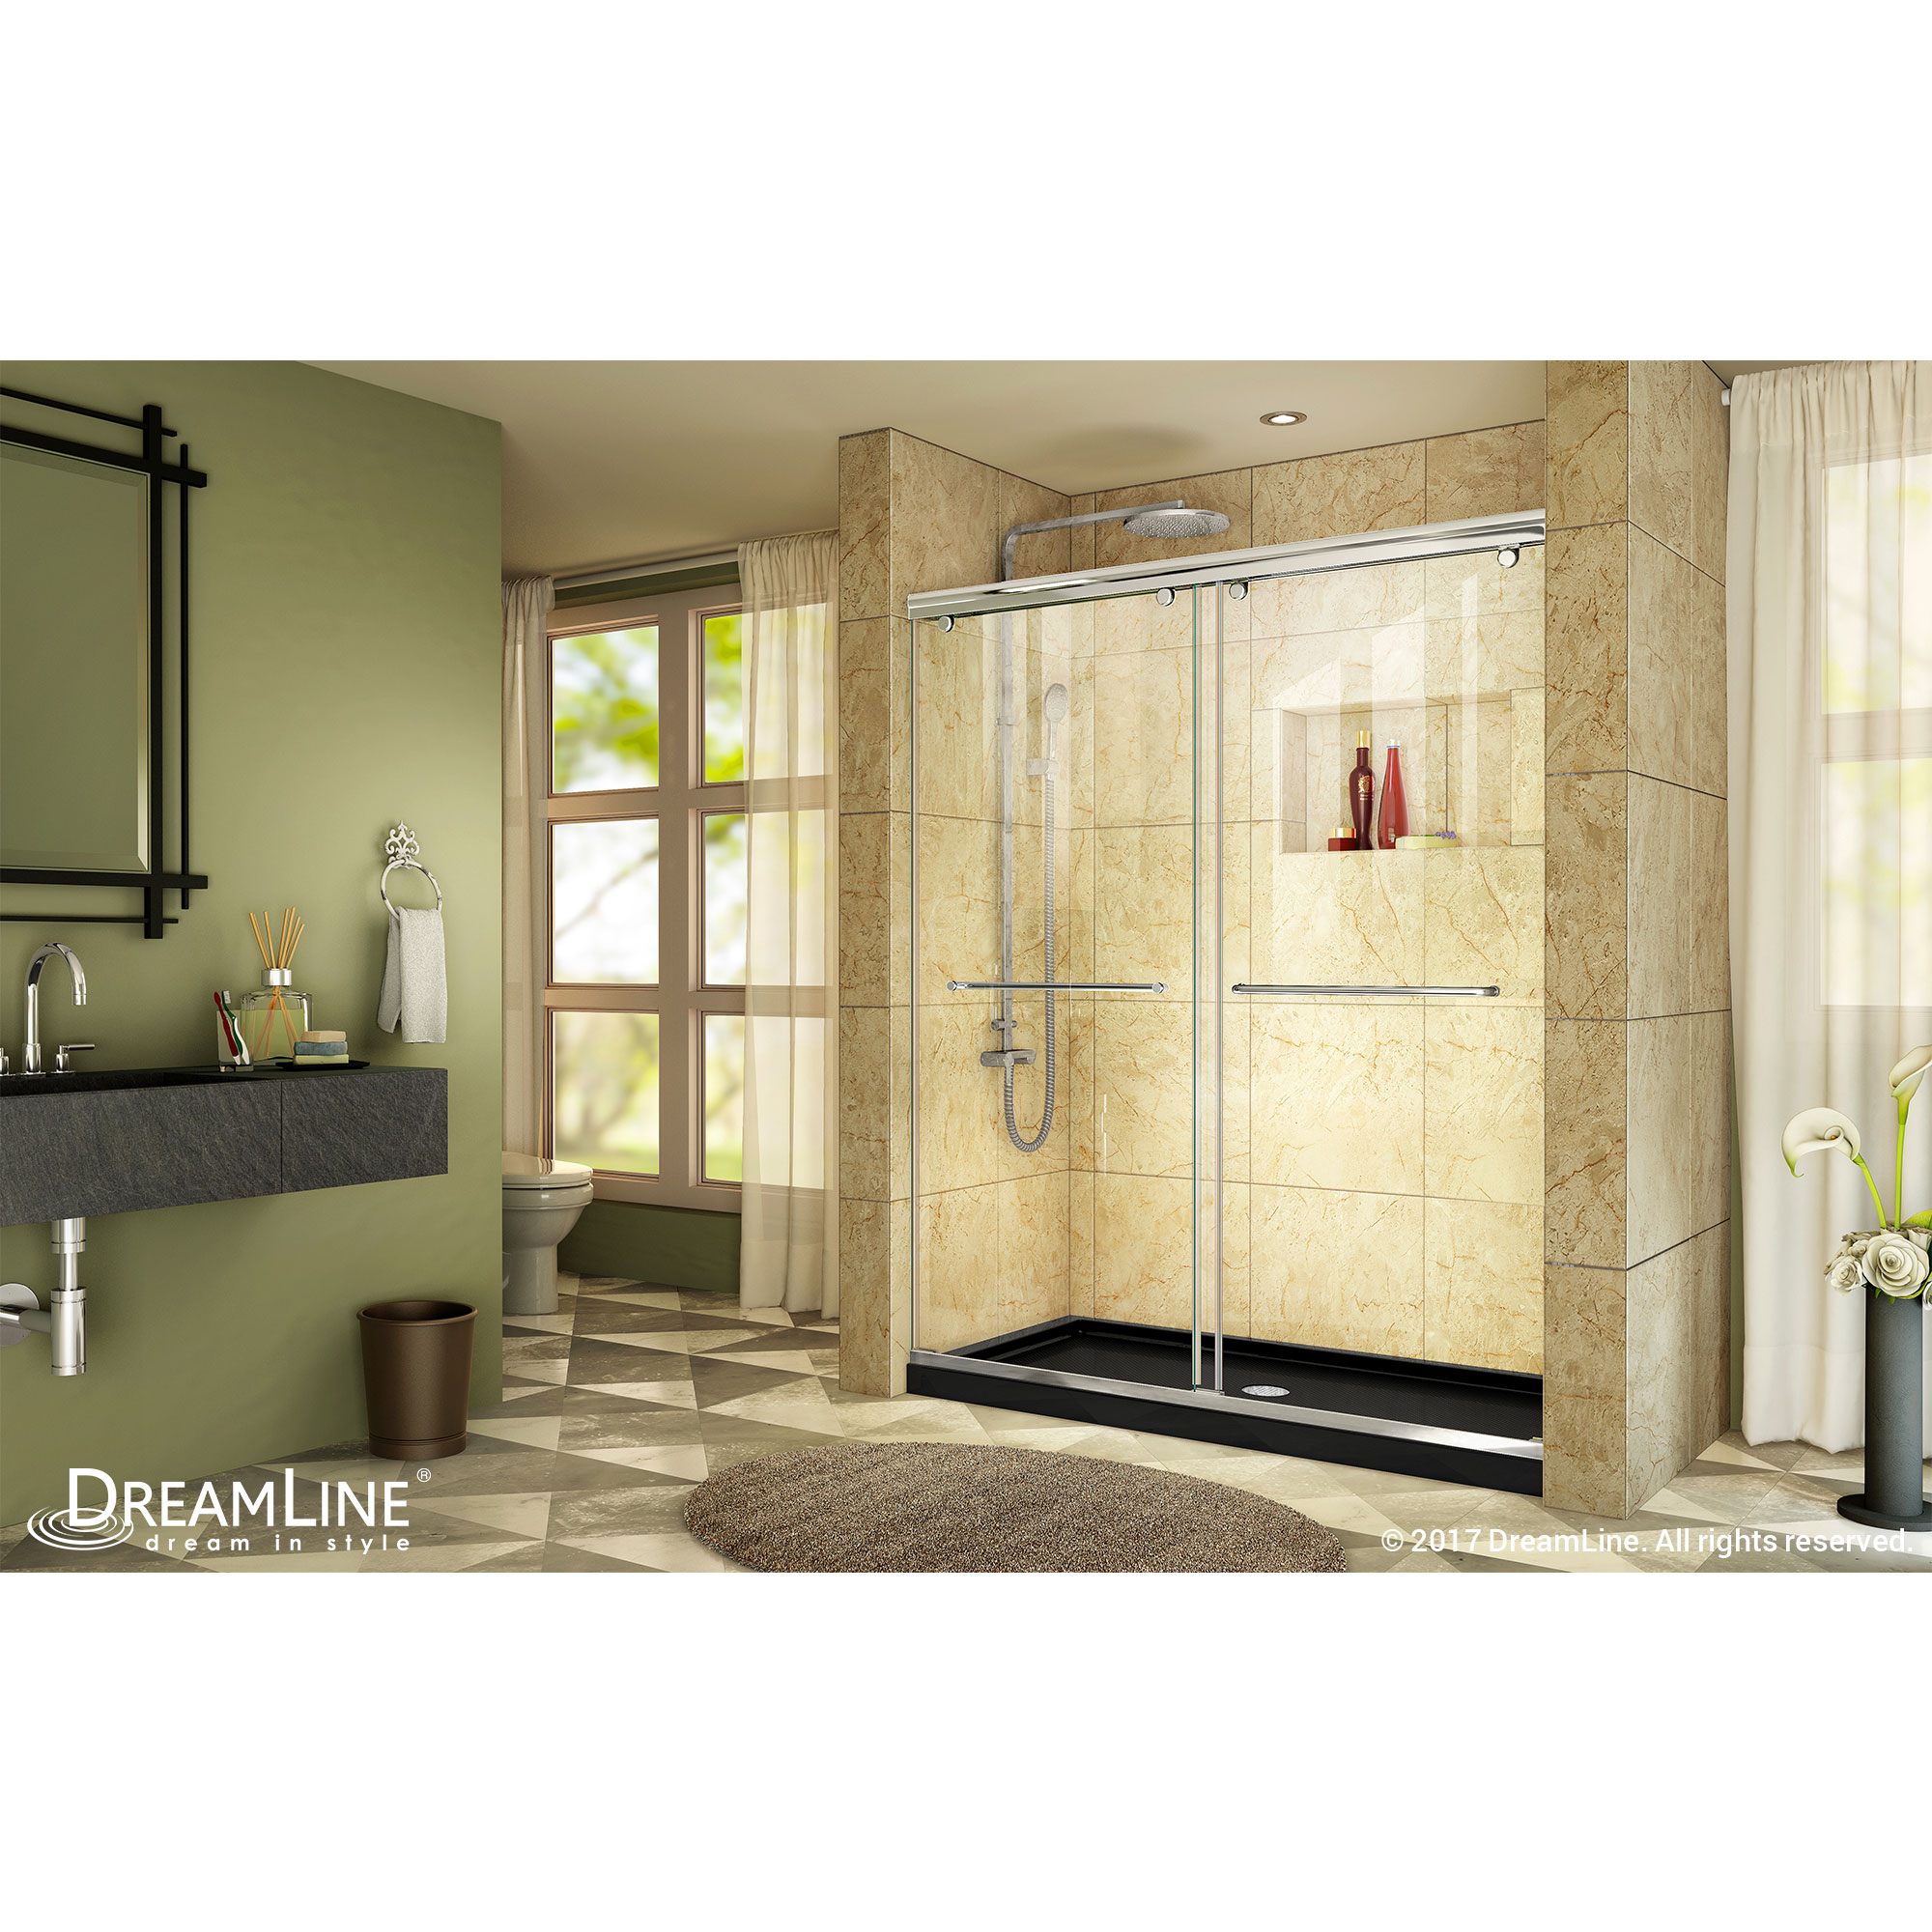 DreamLine Charisma 34 in. D x 60 in. W x 78 3/4 in. H Bypass Shower Door in Chrome with Center Drain Black Base Kit